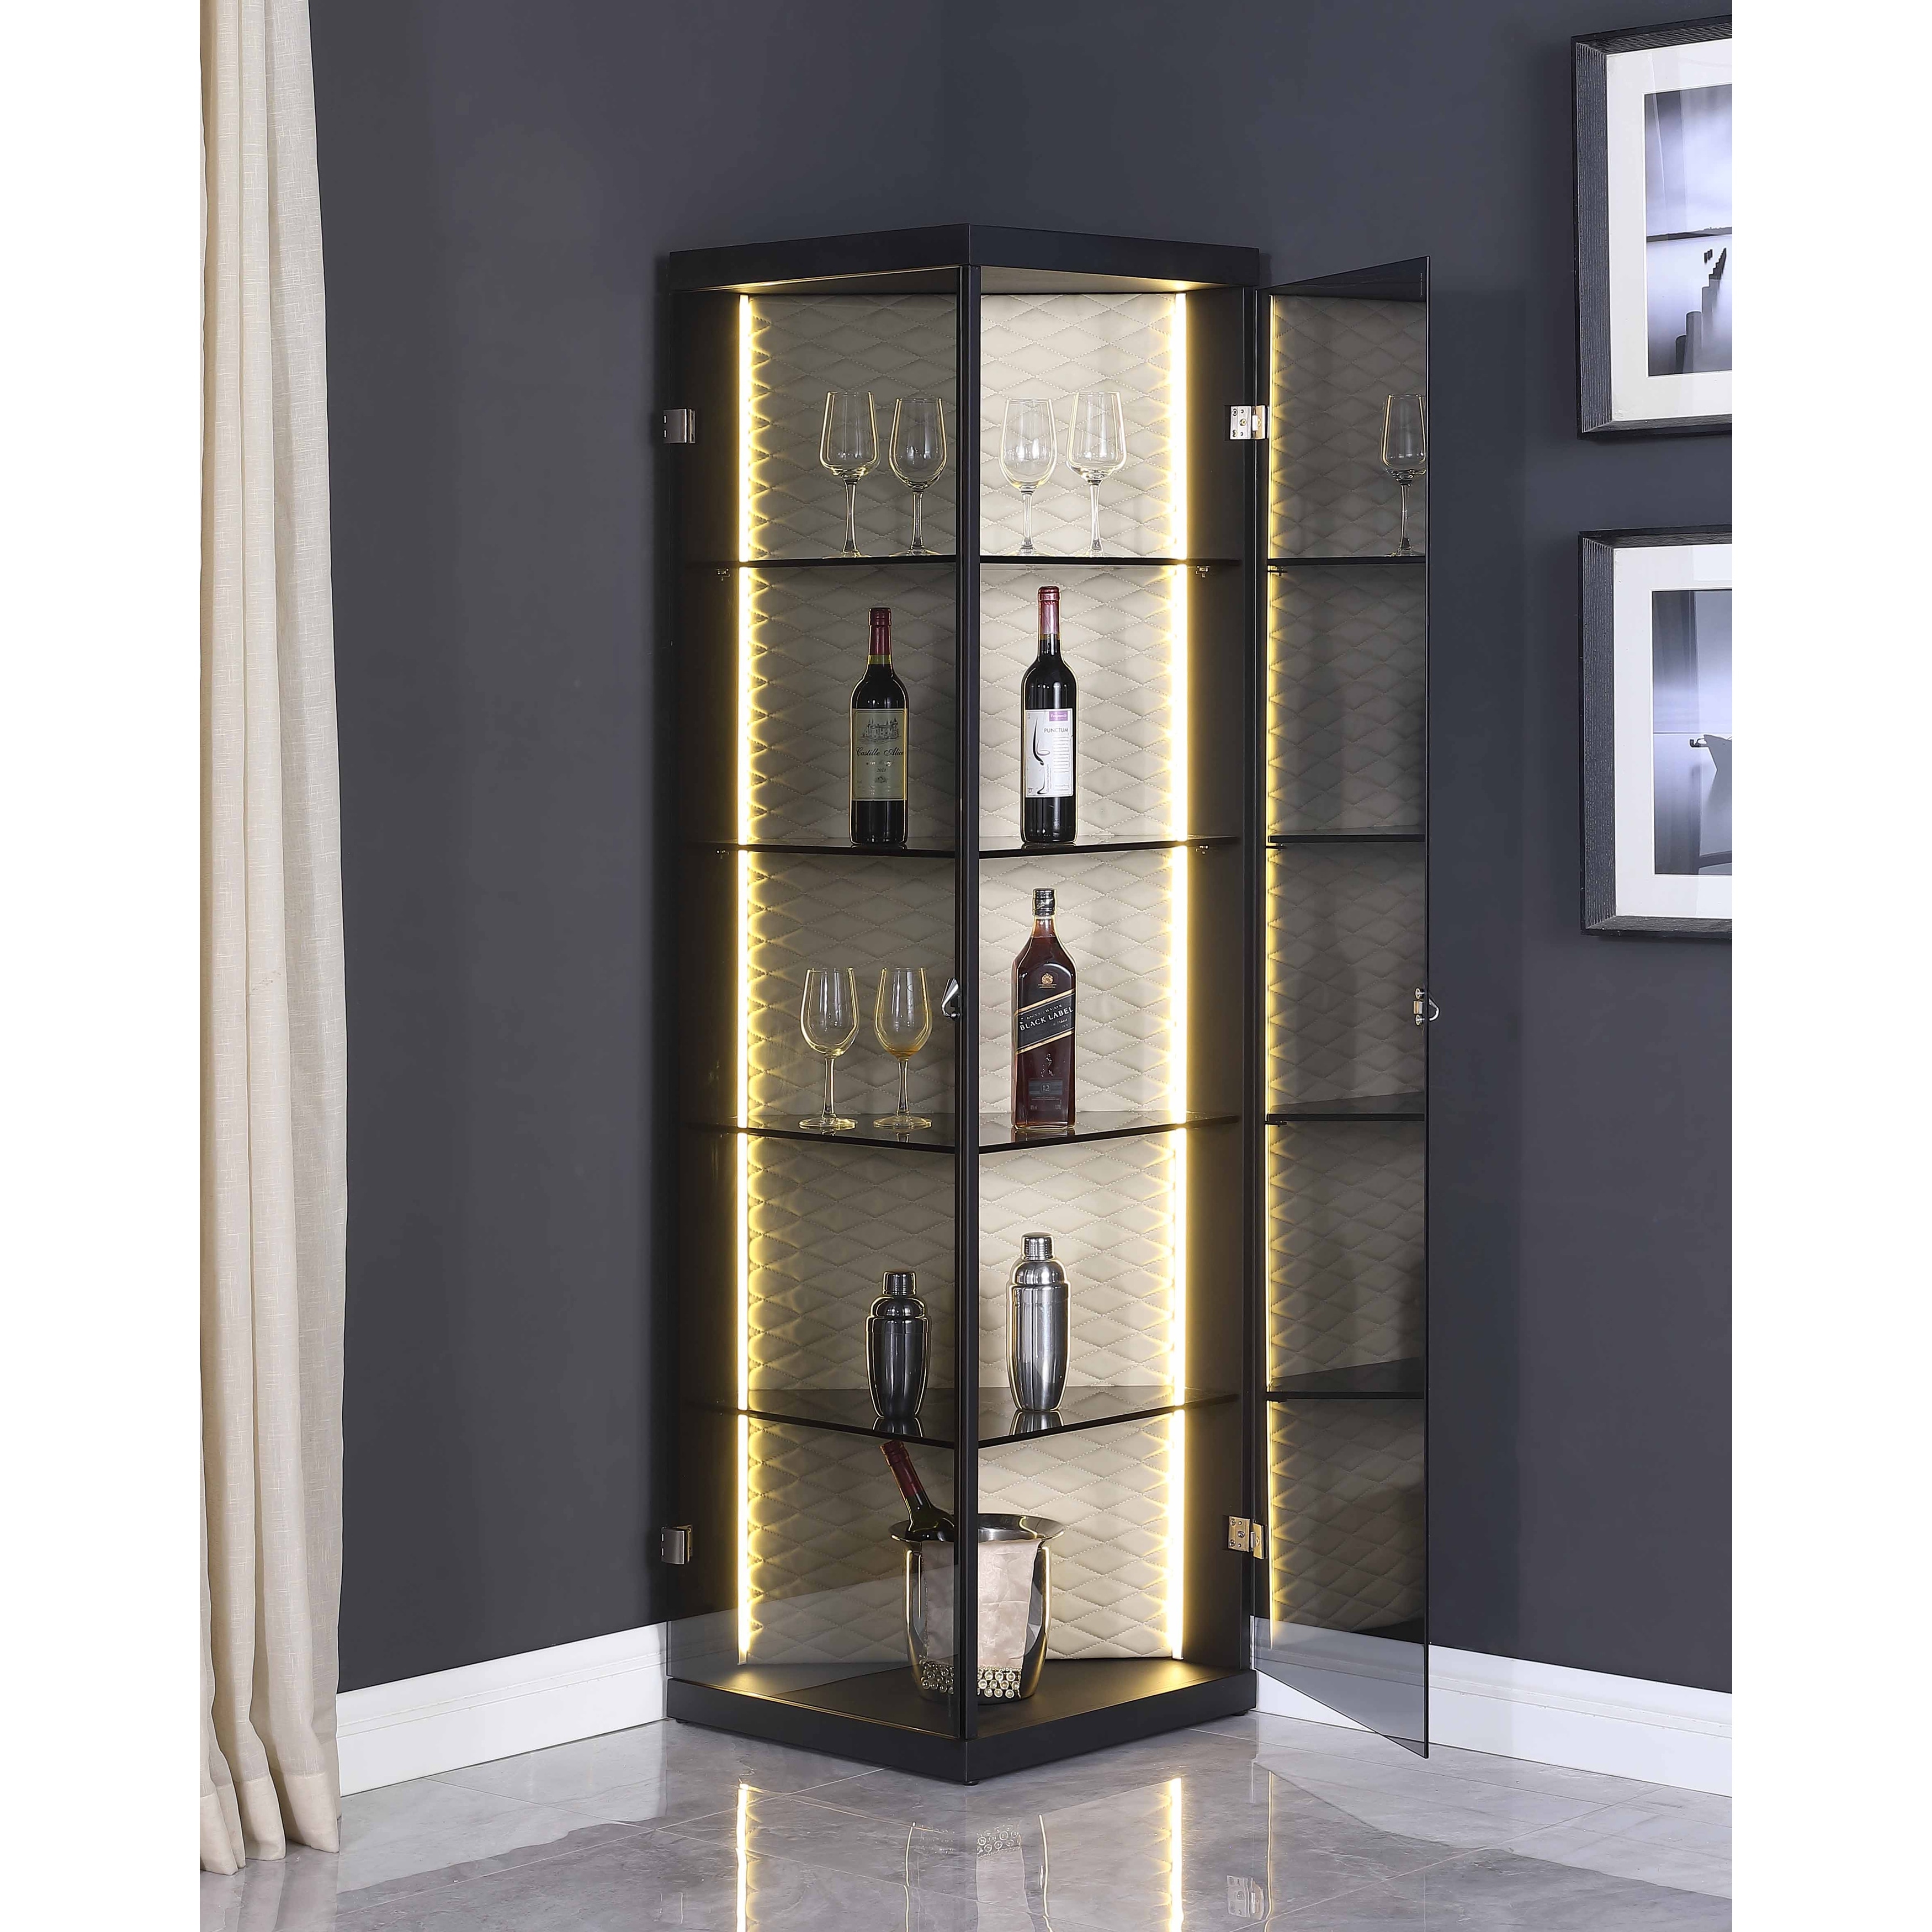 https://ak1.ostkcdn.com/images/products/is/images/direct/08e1f9bf711c21867ff2c89756aeb3df8aea0501/Tinted-Glass-Corner-Curio-in-Matte-Black-with-Upholstered-Back.jpg